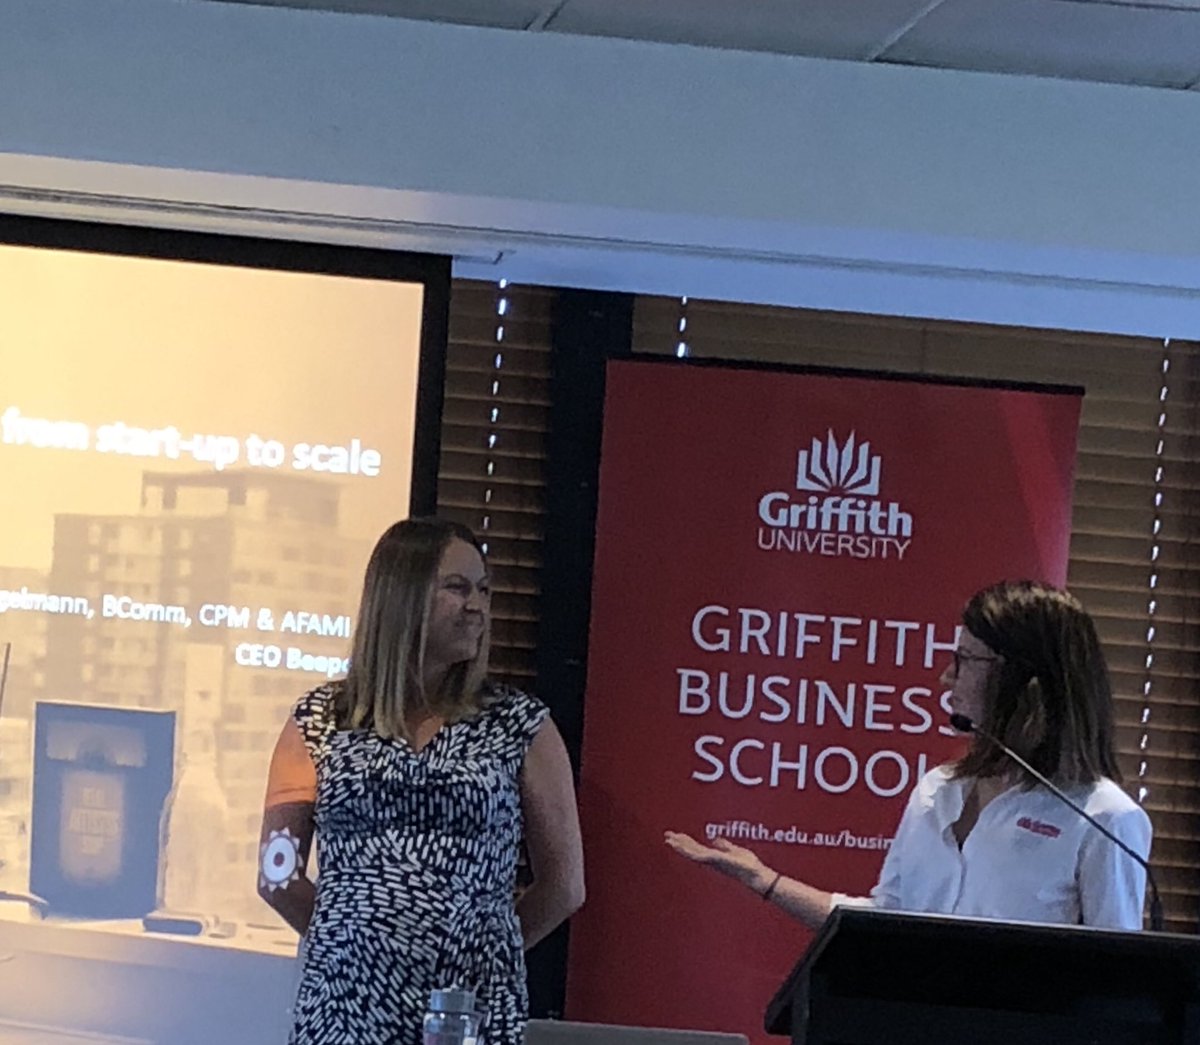 Thanks @GriffithBiz @griffithalumni The #entrepreneurship breakfast this morning was a blast! Great to see you @yaazamAus @PaperSuitcase